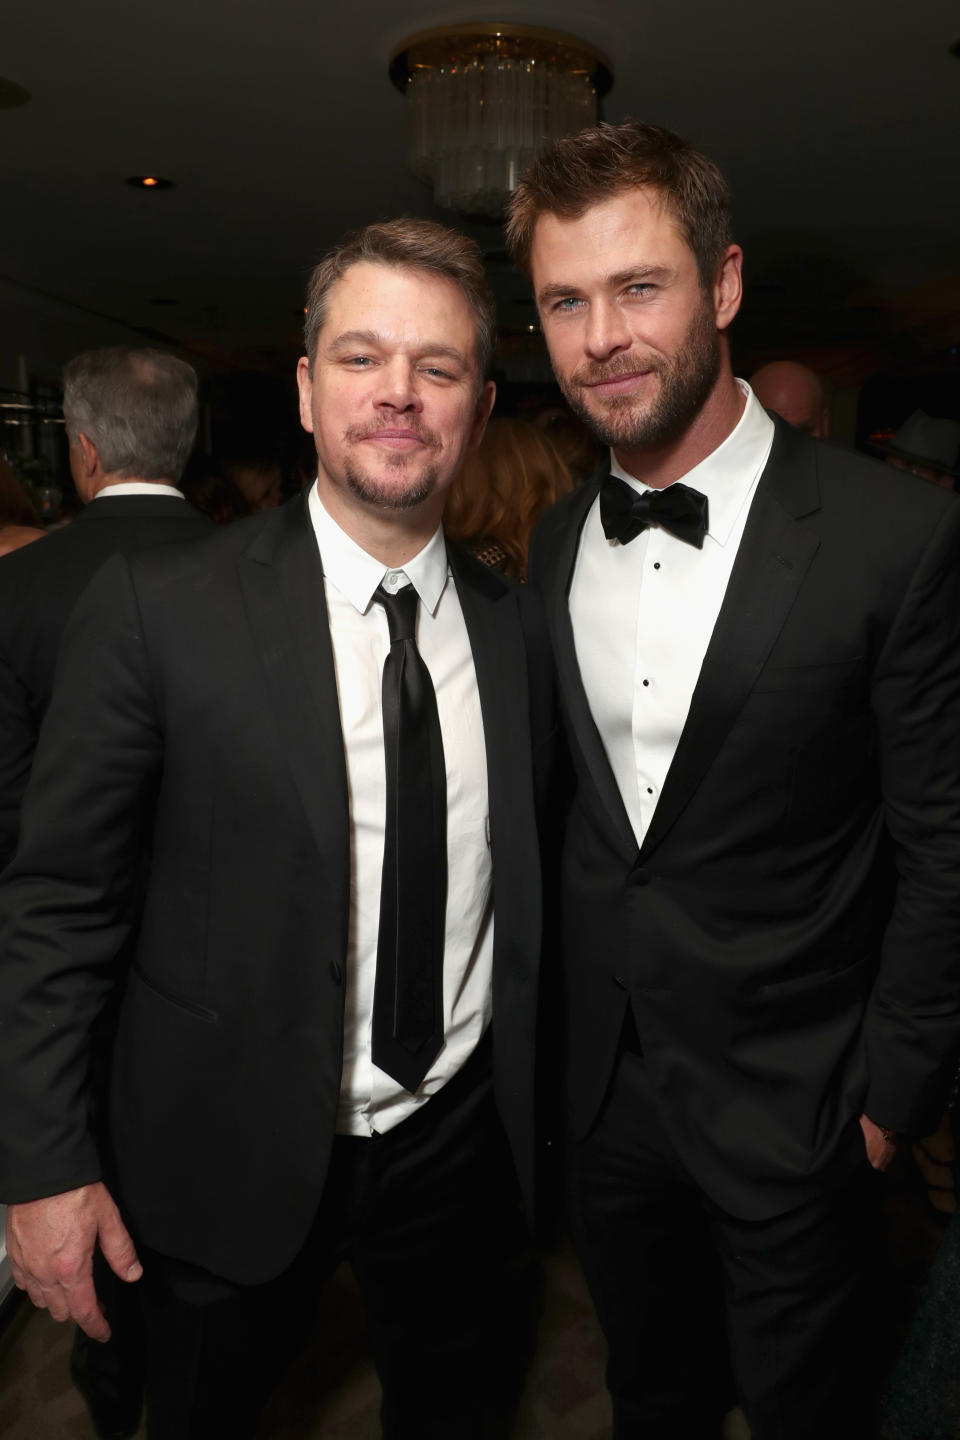 Best ‘bromance’ of all time! Matt Damon and Chris Hemsworth stayed home in Byron Bay to hang out with their seven kids (between them) while their lady-loves enjoyed a girls weekend in Sydney. Source: Getty